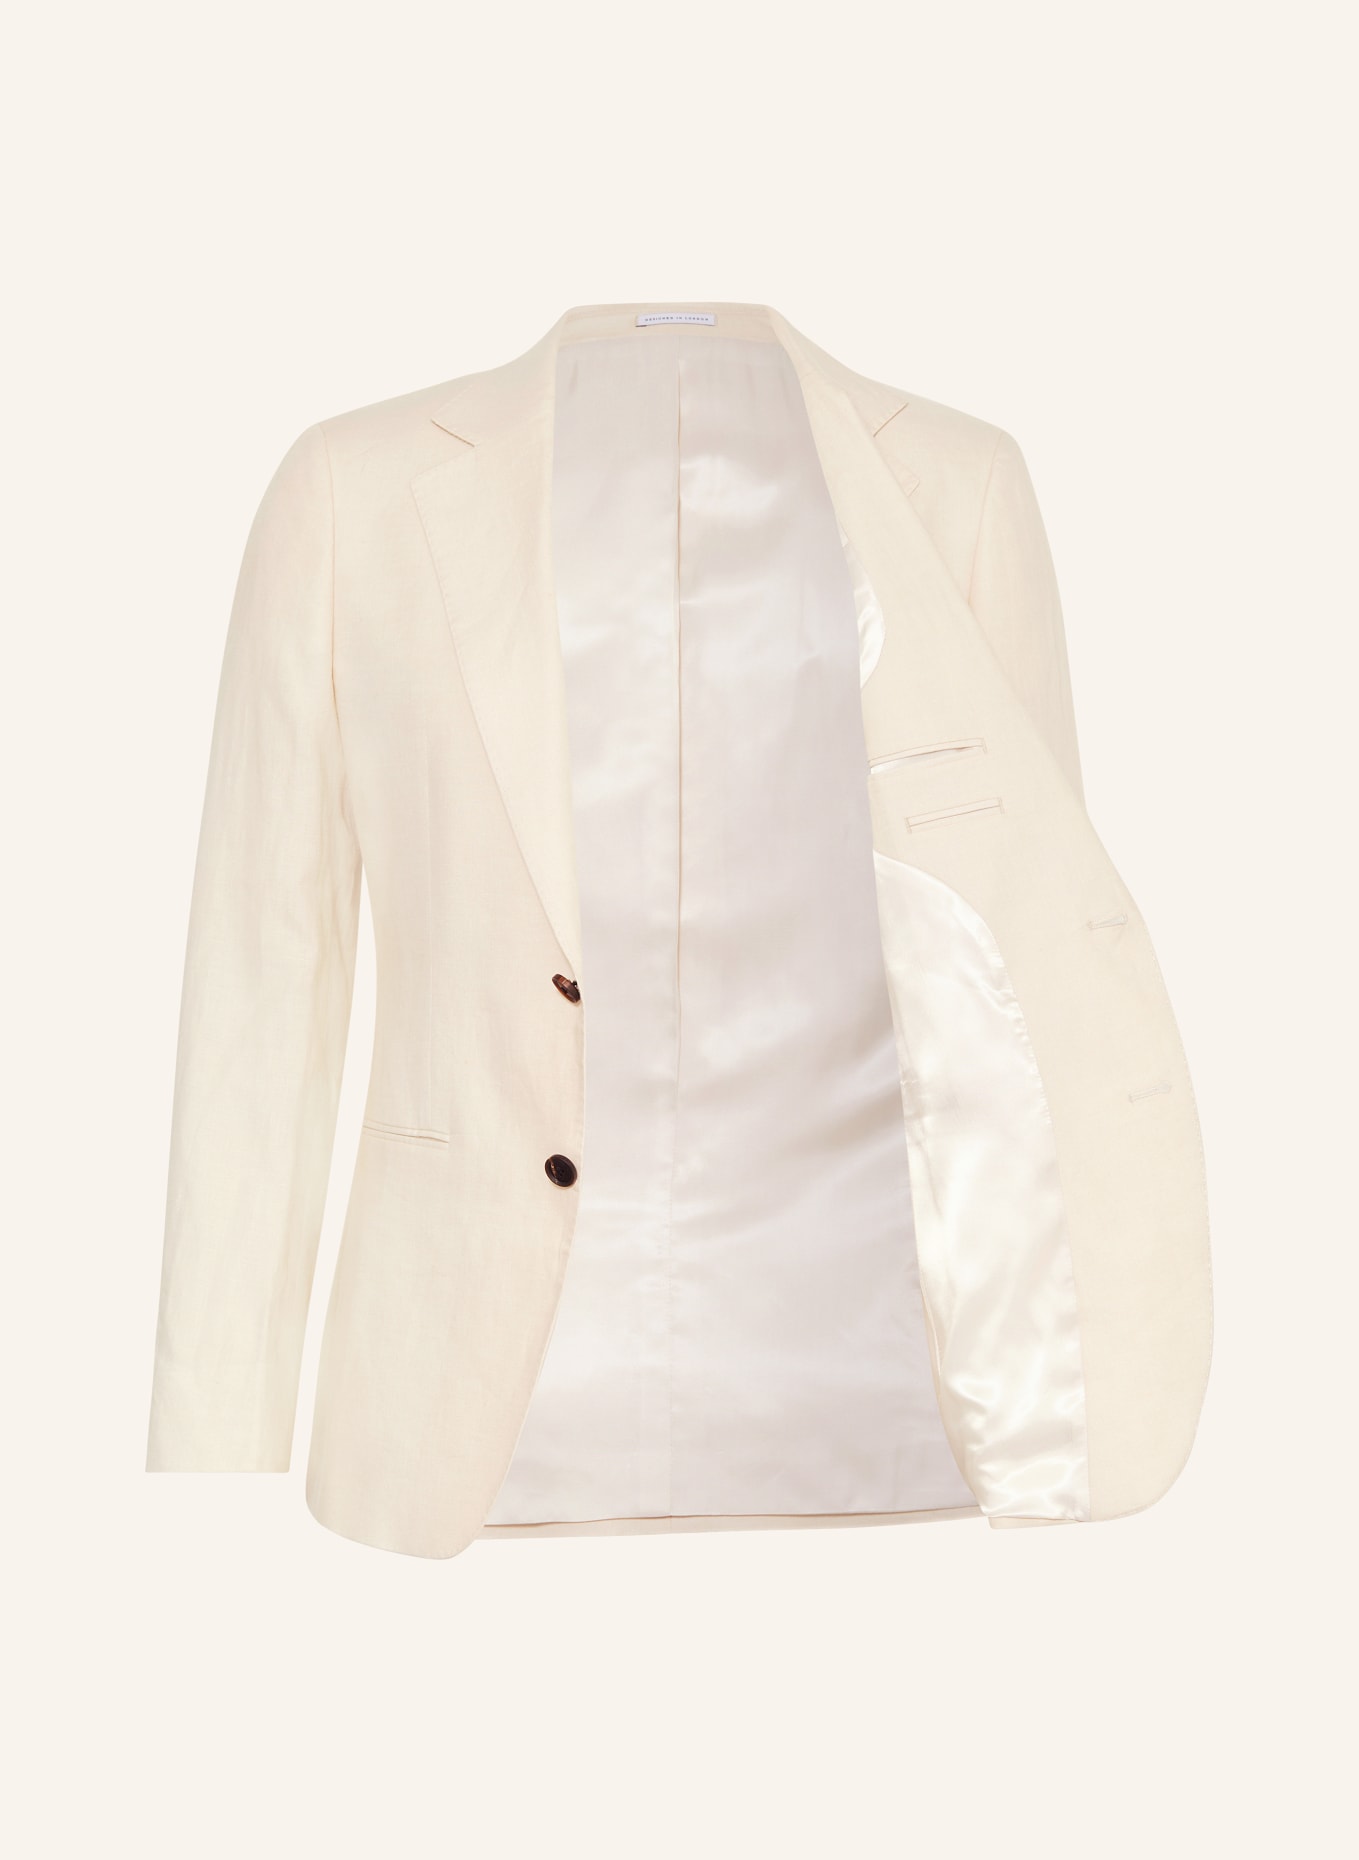 REISS Suit jacket KIN slim fit made of linen, Color: 04 STONE (Image 4)